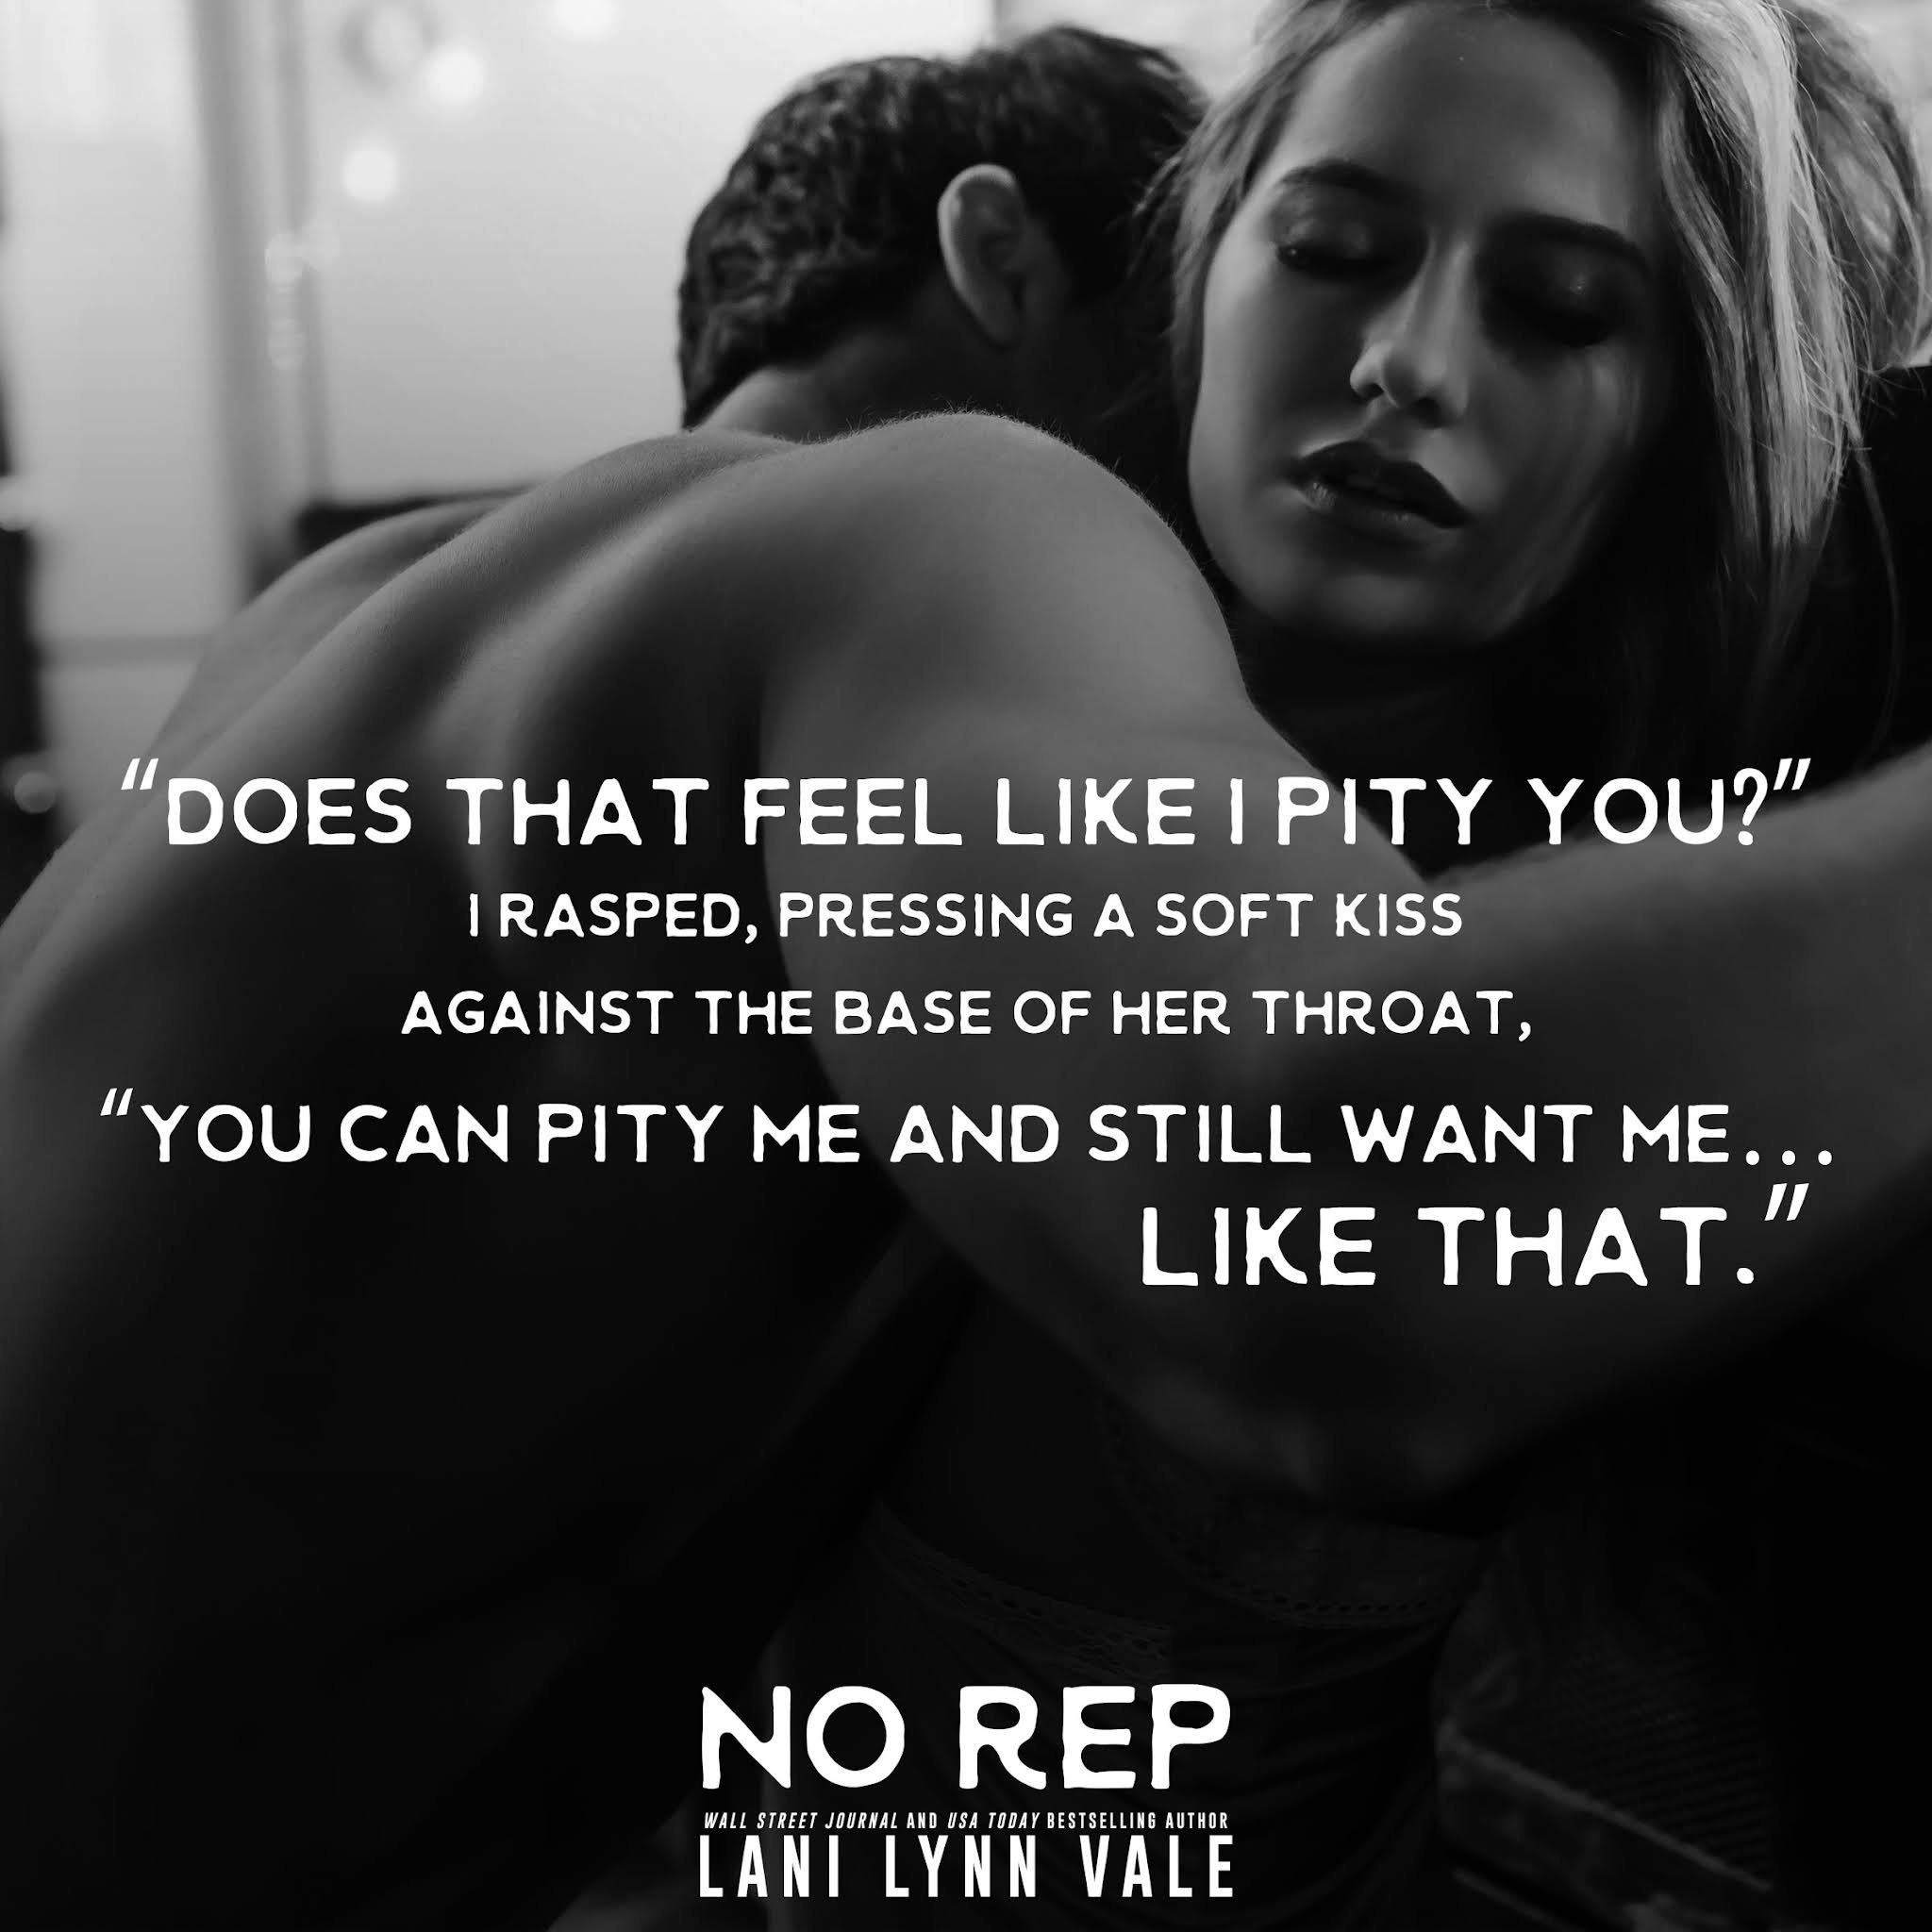 No Rep (Madd CrossFit, #1) by Lani Lynn Vale Goodreads picture